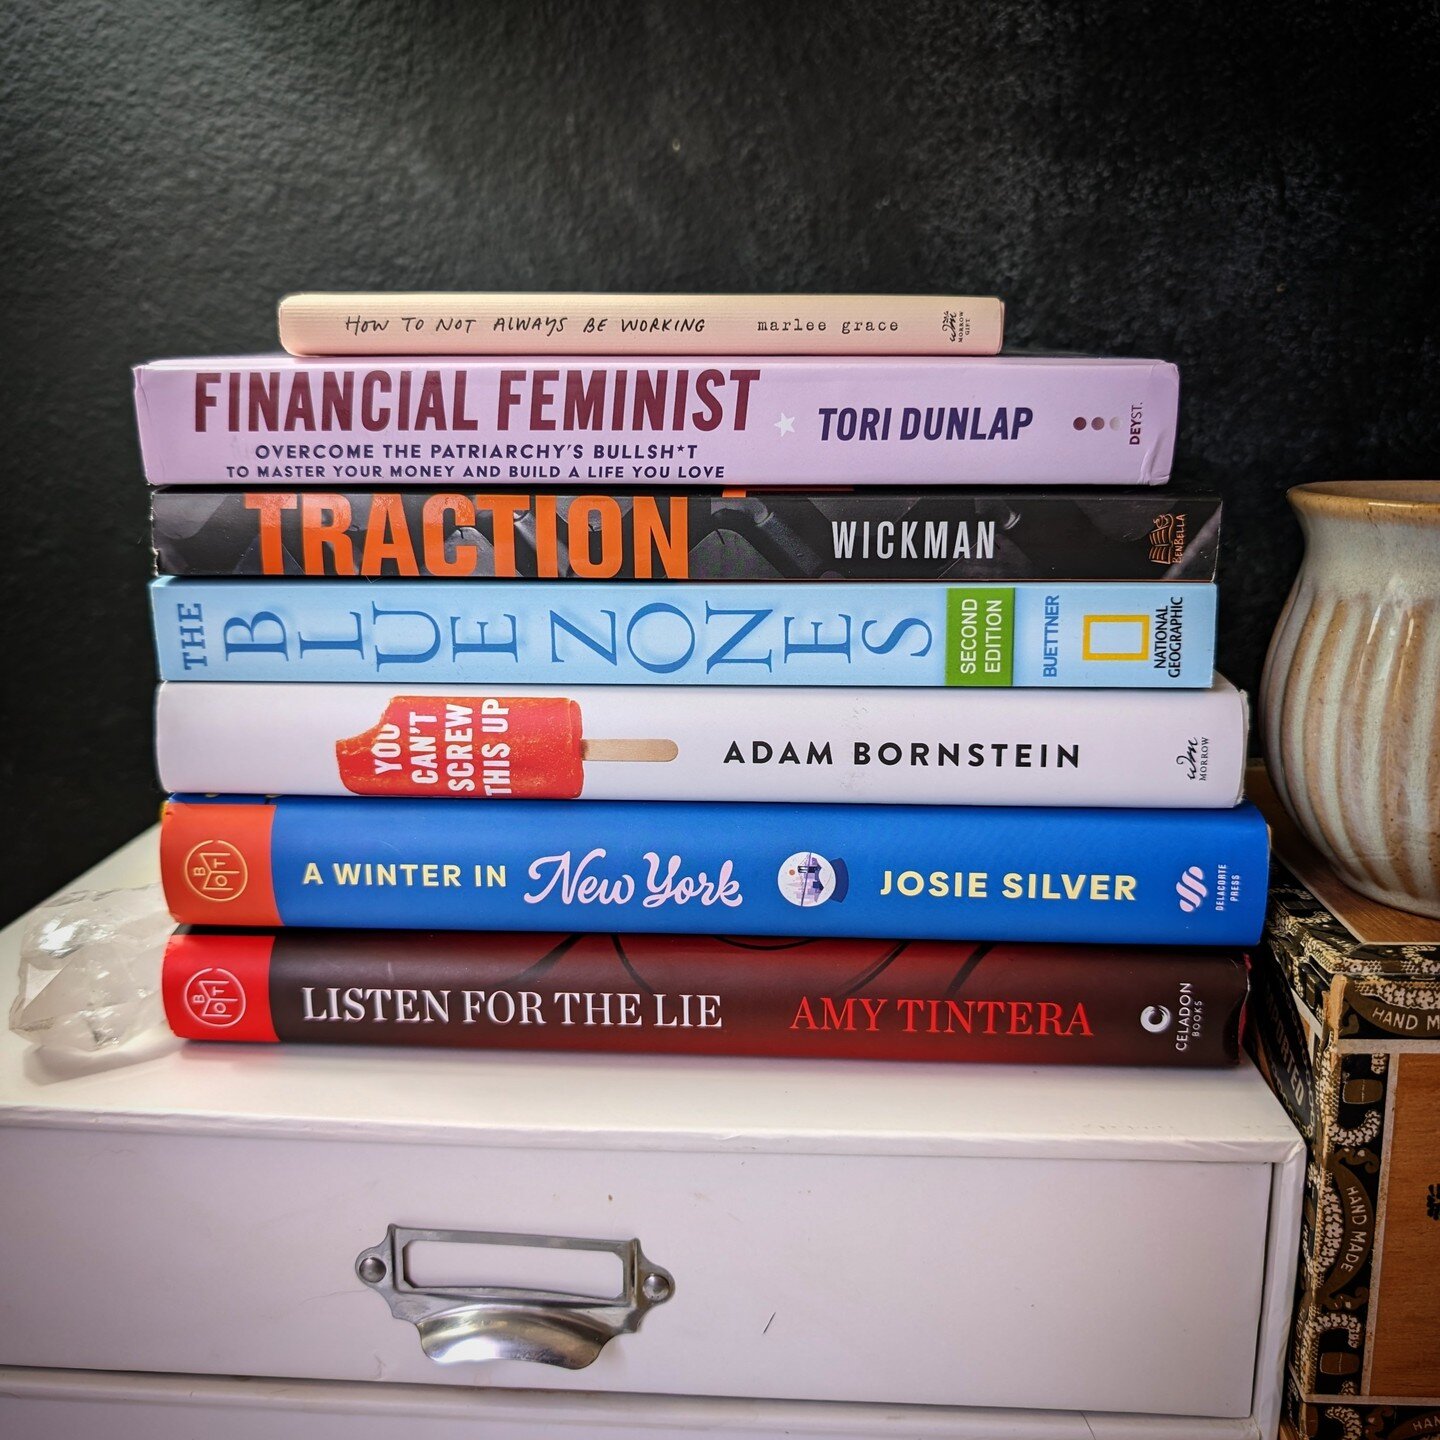 Rounding up my favorite books from this first quarter 📚! Here's what I've read in Q1:

How to Not Always Be Working by Marlee Grace

Financial Feminist by @financialfeministbook 

Traction: Get a Grip on Your Business by Gino Wickman

Blue Zones: 9 